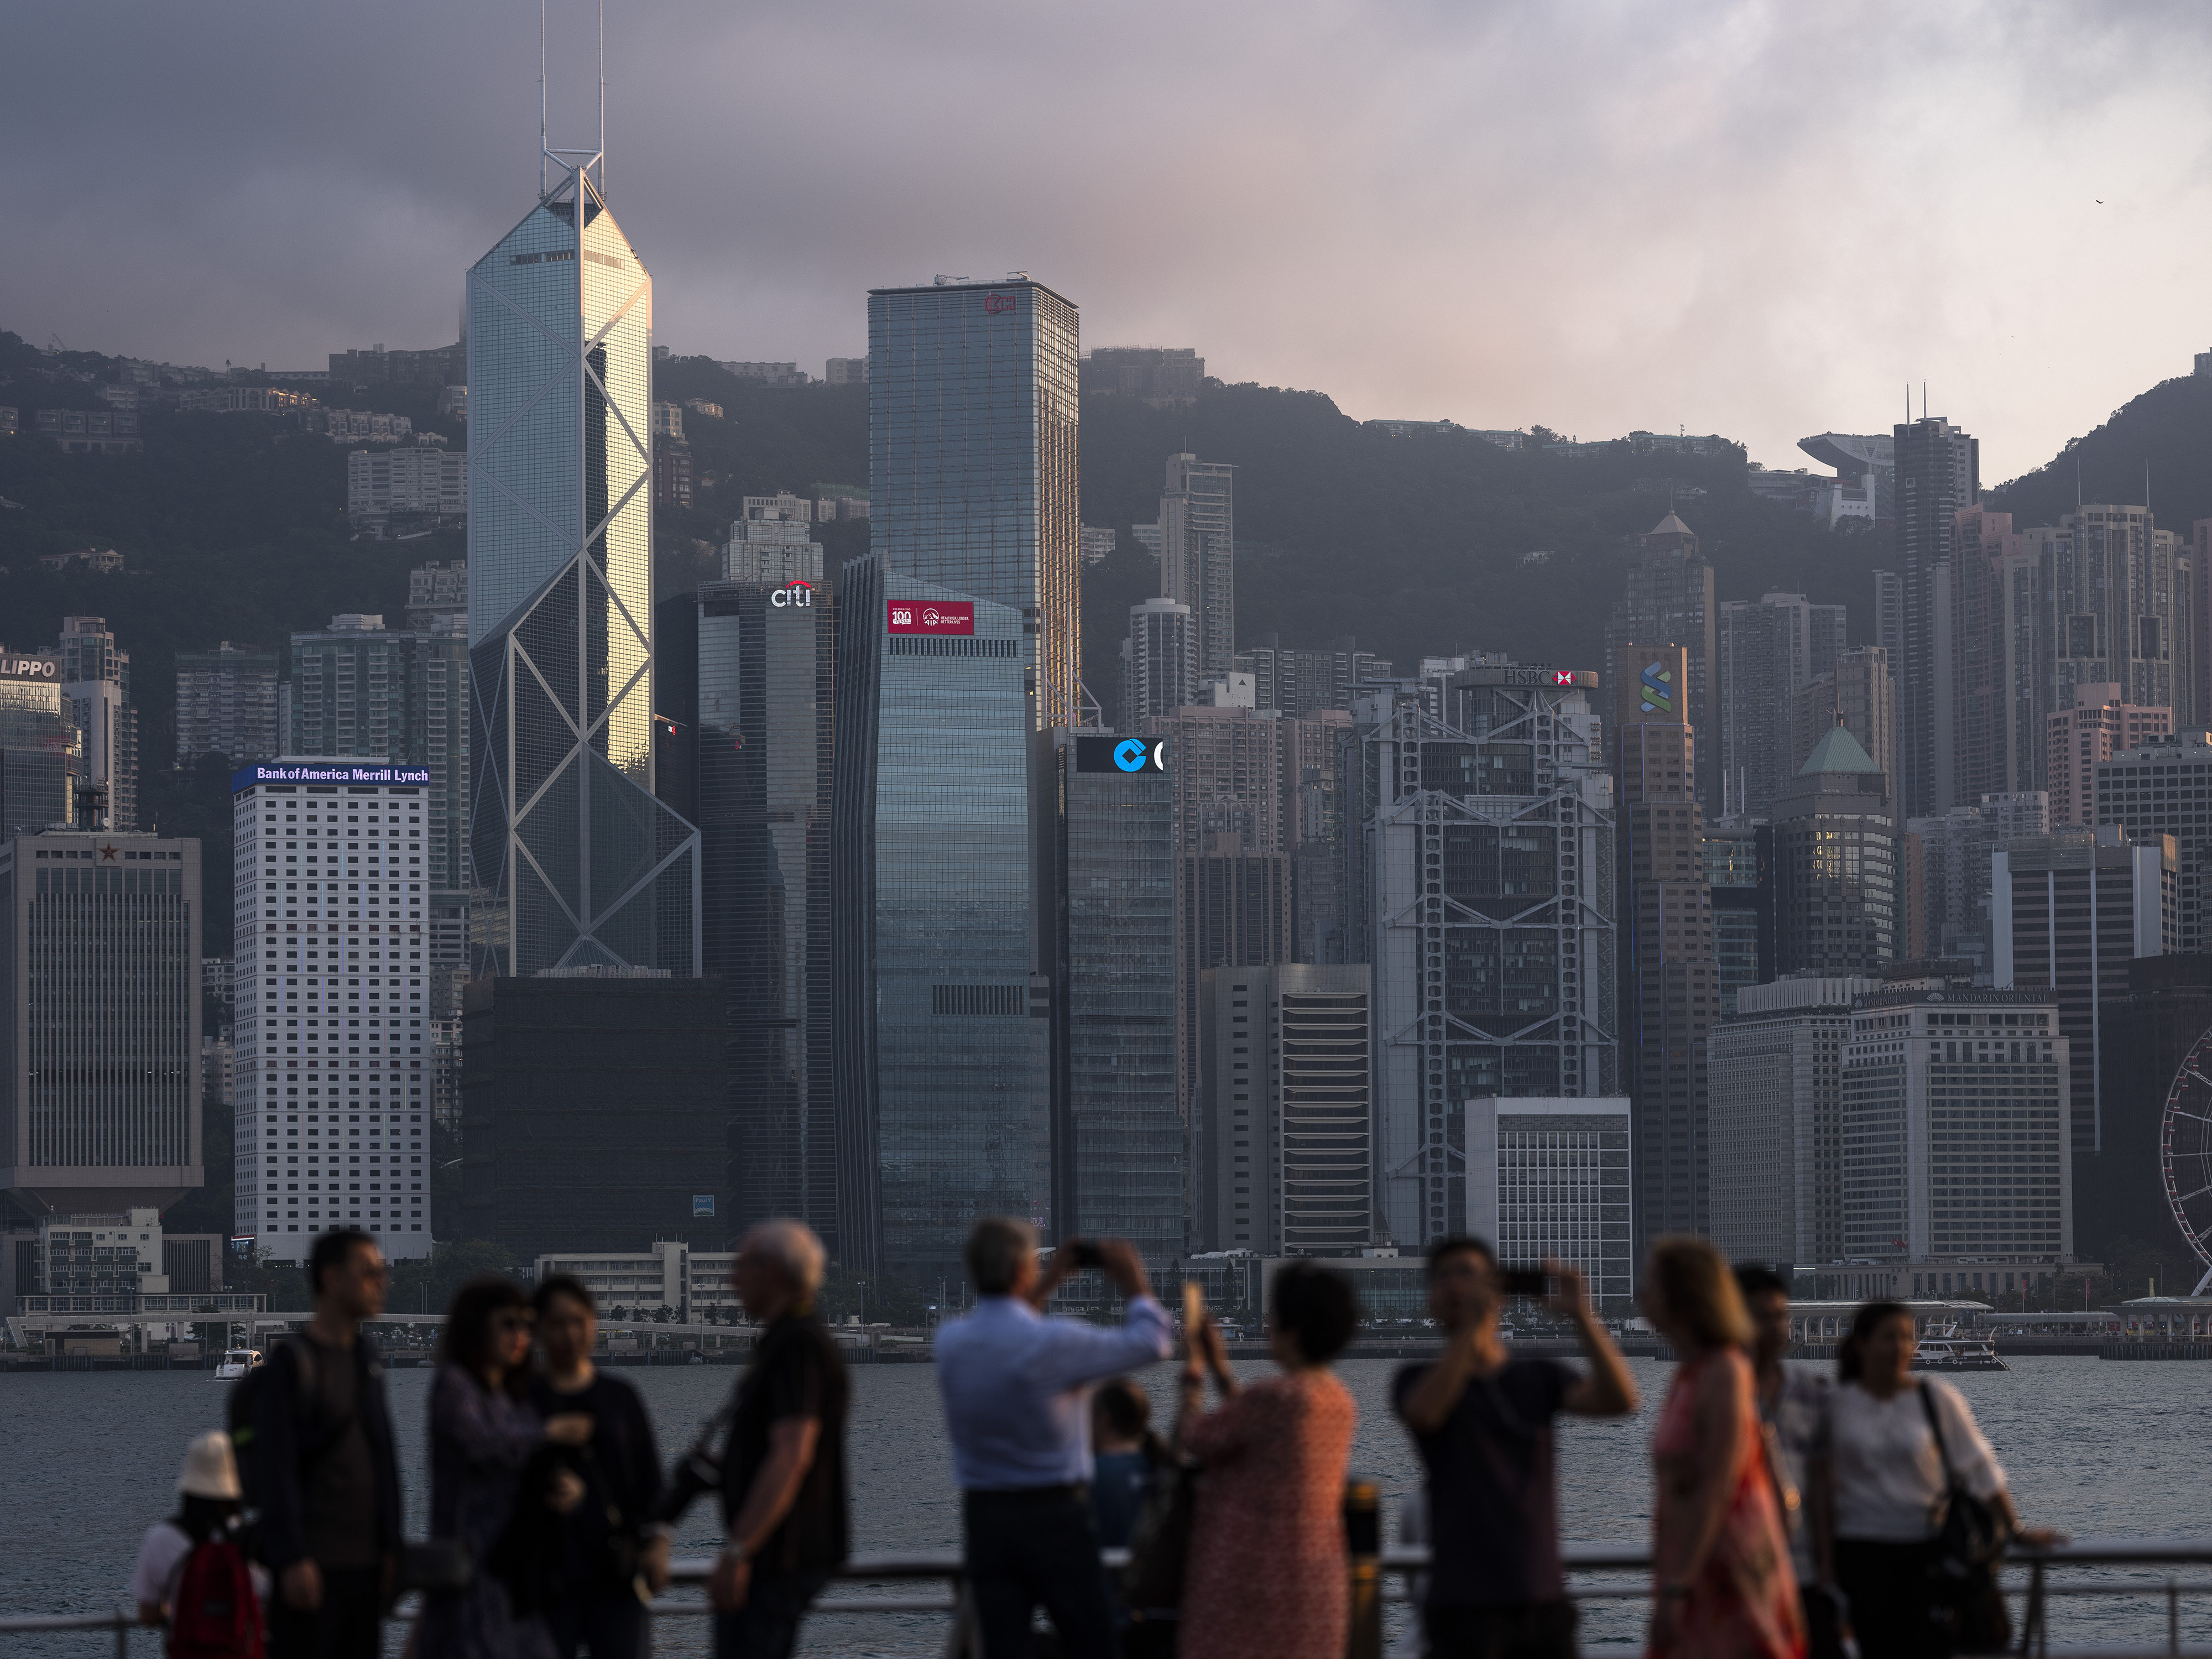 People take photos of the Hong Kong skyline featuring major banks from the Tsim Sha Tsui waterfront on April 29, 2019. Photo: Bloomberg